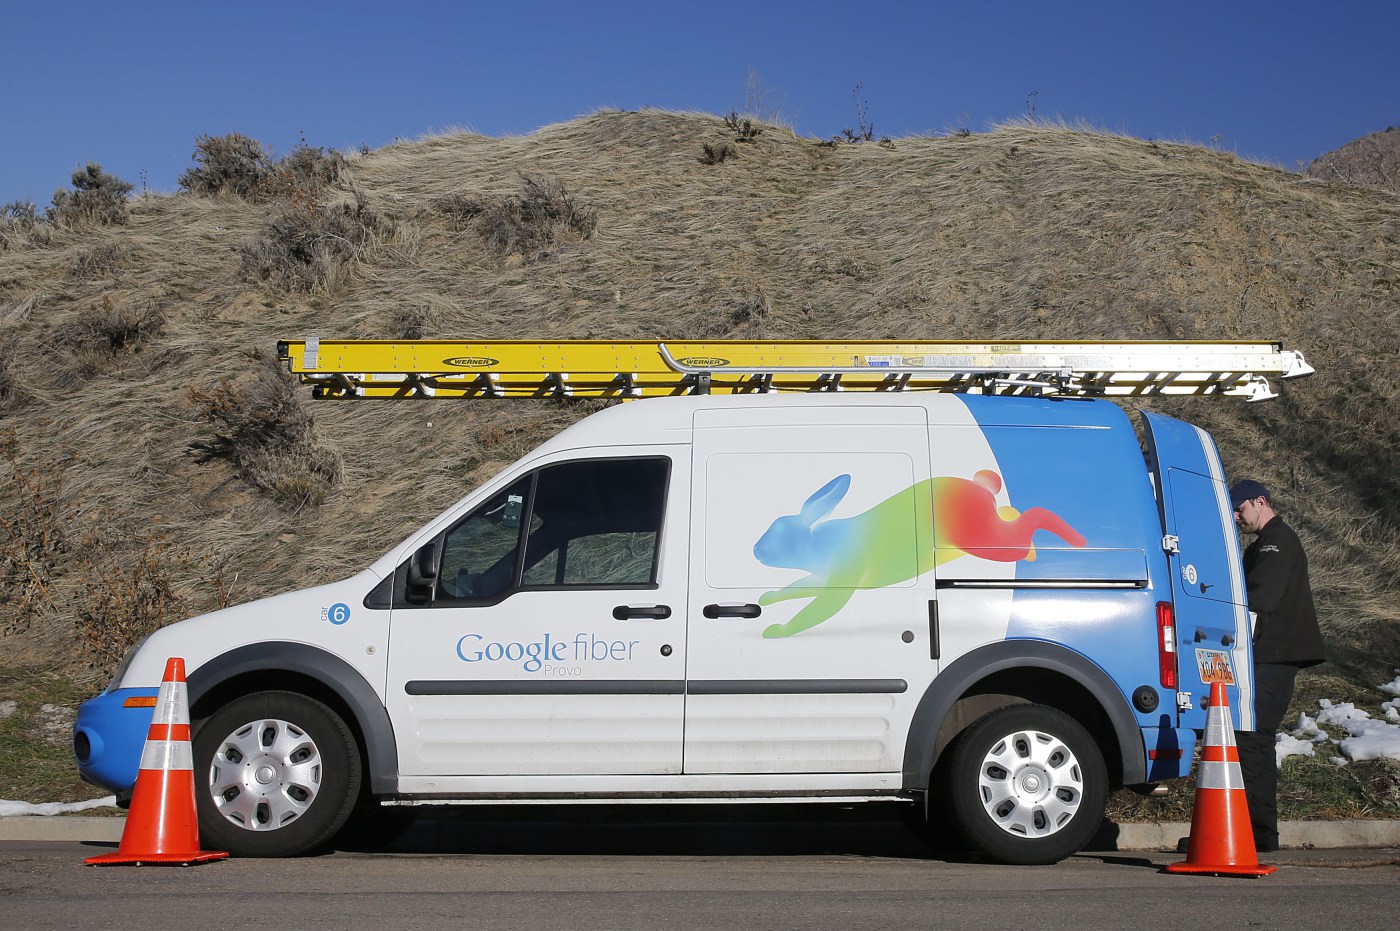 A Google Fiber technician gets supplies out of his truck to install Google Fiber in a residential home in Provo, Utah, January 2, 2014. Provo is one of three cities Google is currently building gigabit internet and television service for business and residential use.